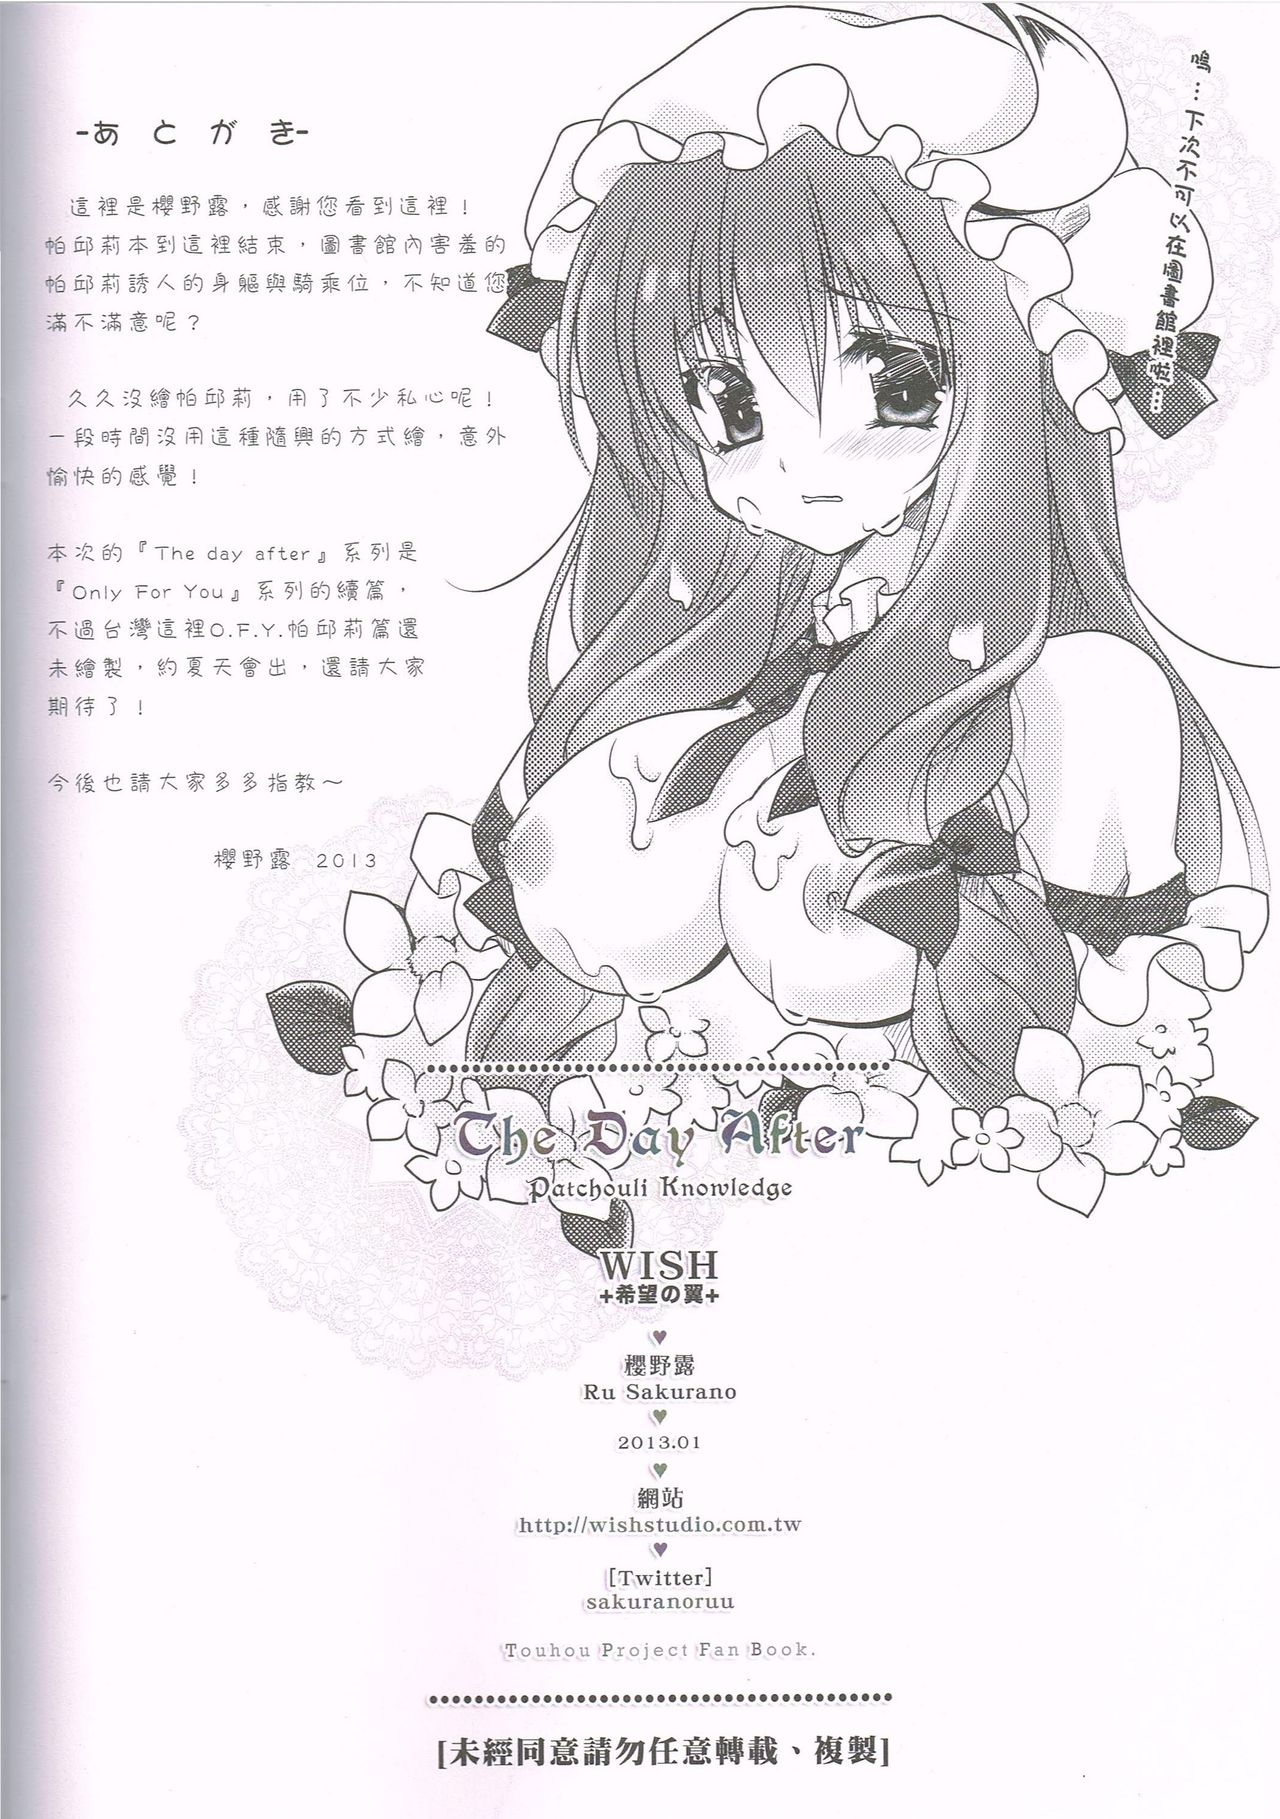 [Wish +Kibou no Tsubasa+ (Sakurano Ru)] The Day After - Patchouli Knowledge (Touhou Project) [Chinese] [Wish +希望の翼+ (櫻野露)] The Day After Patchouli Knowledge (東方Project) [中国語]